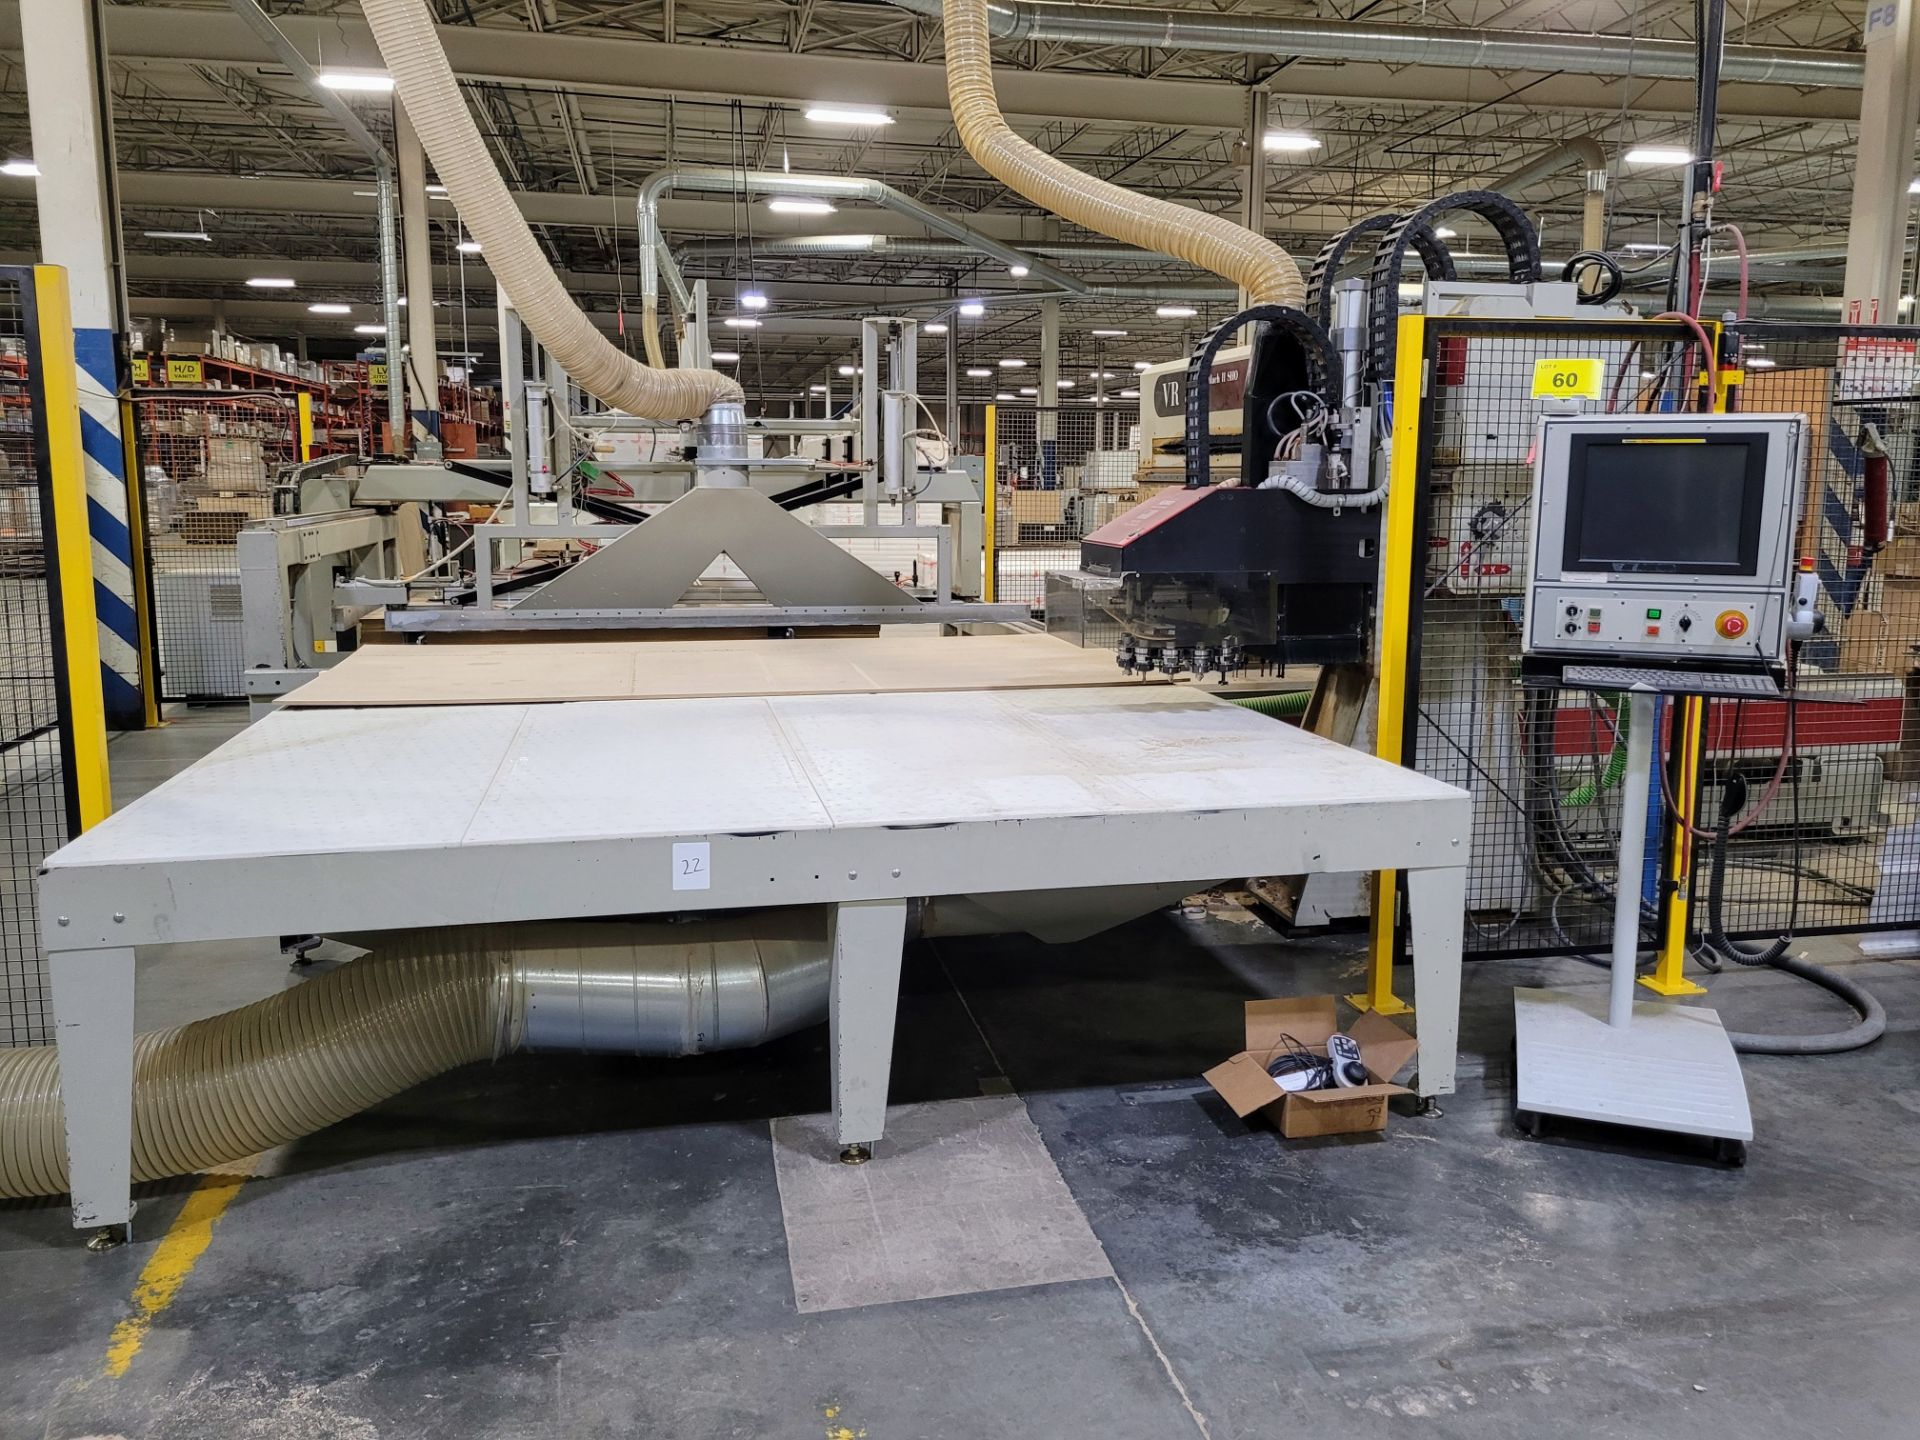 2006 KOMO VR510 MACHI II CNC ROUTER, 60" X 120" VACUUM TABLE, 16HP ATC VARIABLE SPEED SPINDLE, 10-